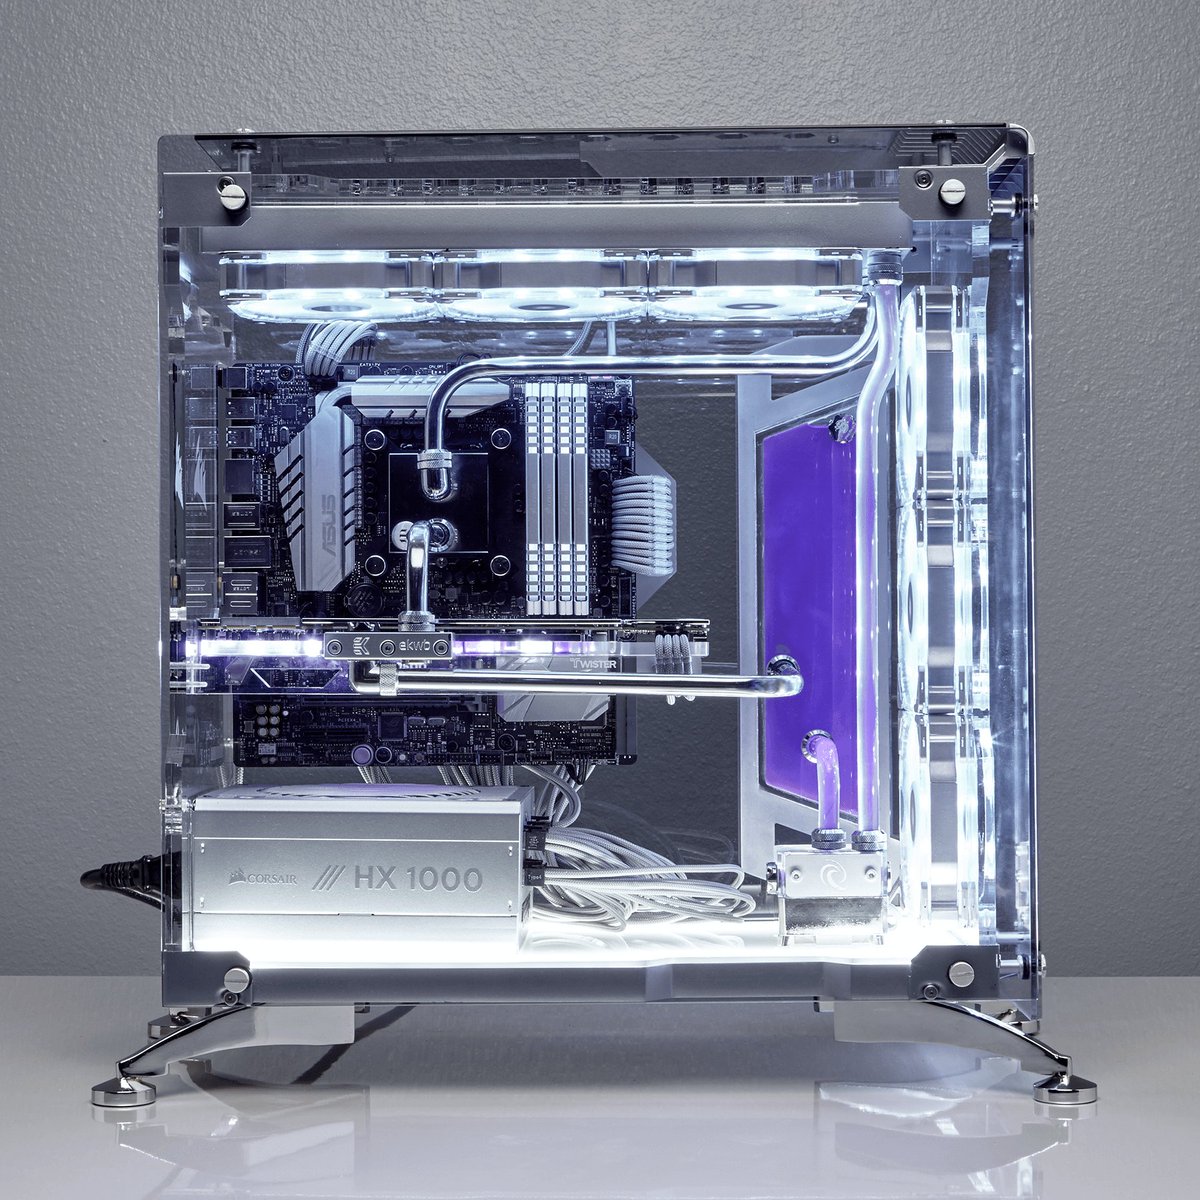 CORSAIR on Twitter: "Crystal clear build. Check out the gorgeous 570X mod, featuring custom mirror acrylic panels: https://t.co/70LJgA4Rtj / Twitter